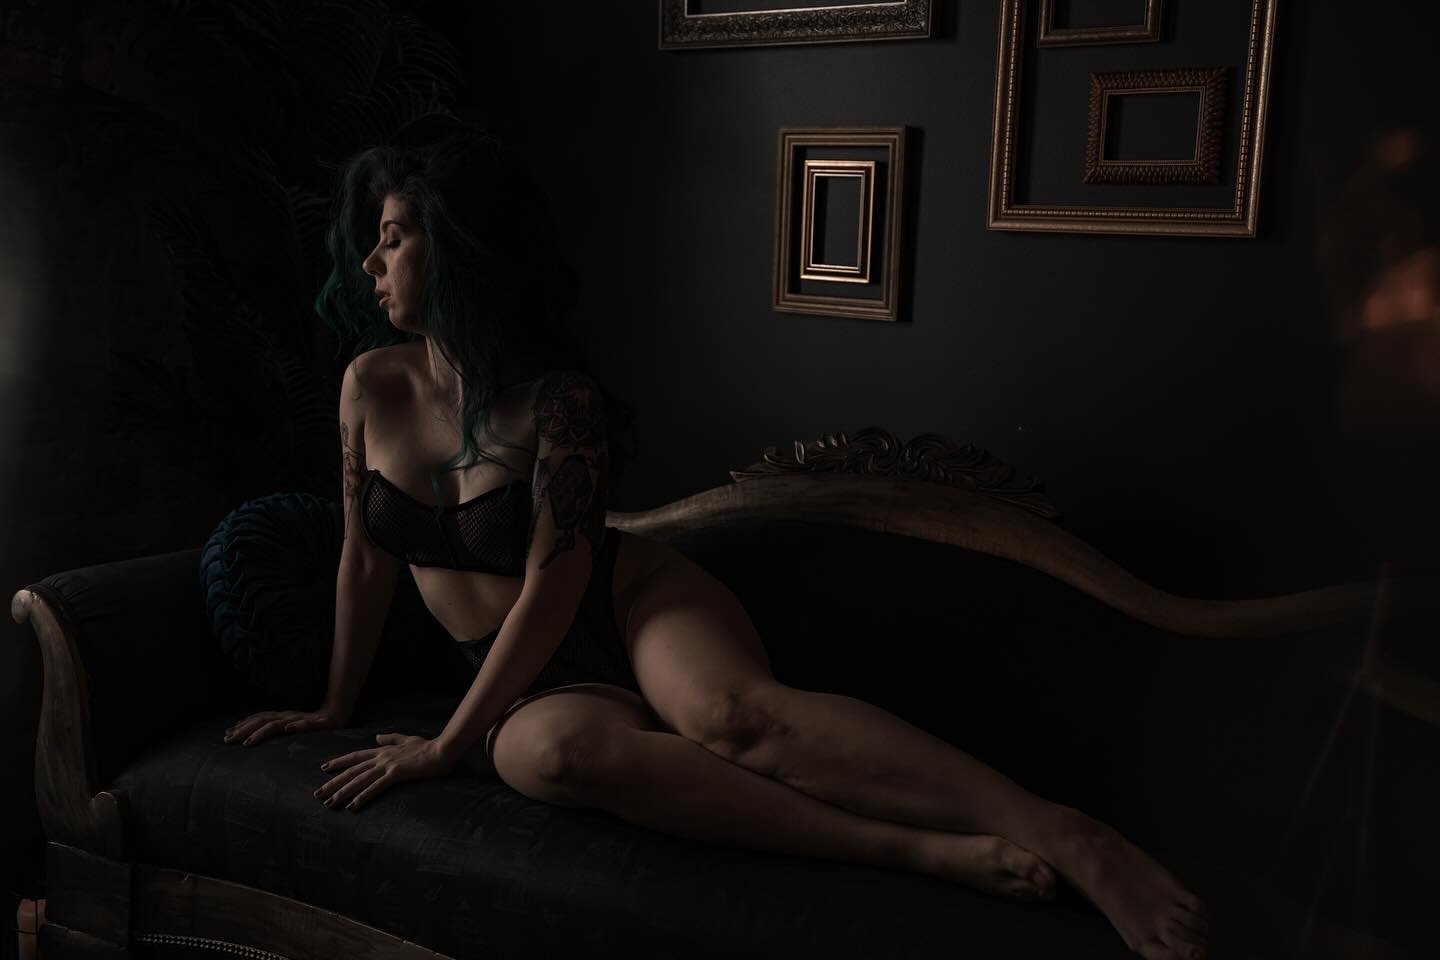 Her vivid teal hair brought the perfect pop of color to our lush, dark boudoir sets. Are you as obsessed as we are? Let us know below! 
.
.
.
#tealhair #boudoirbeauty #nashvilleboudoir #darkandmoodyphotography #boudoirvibes